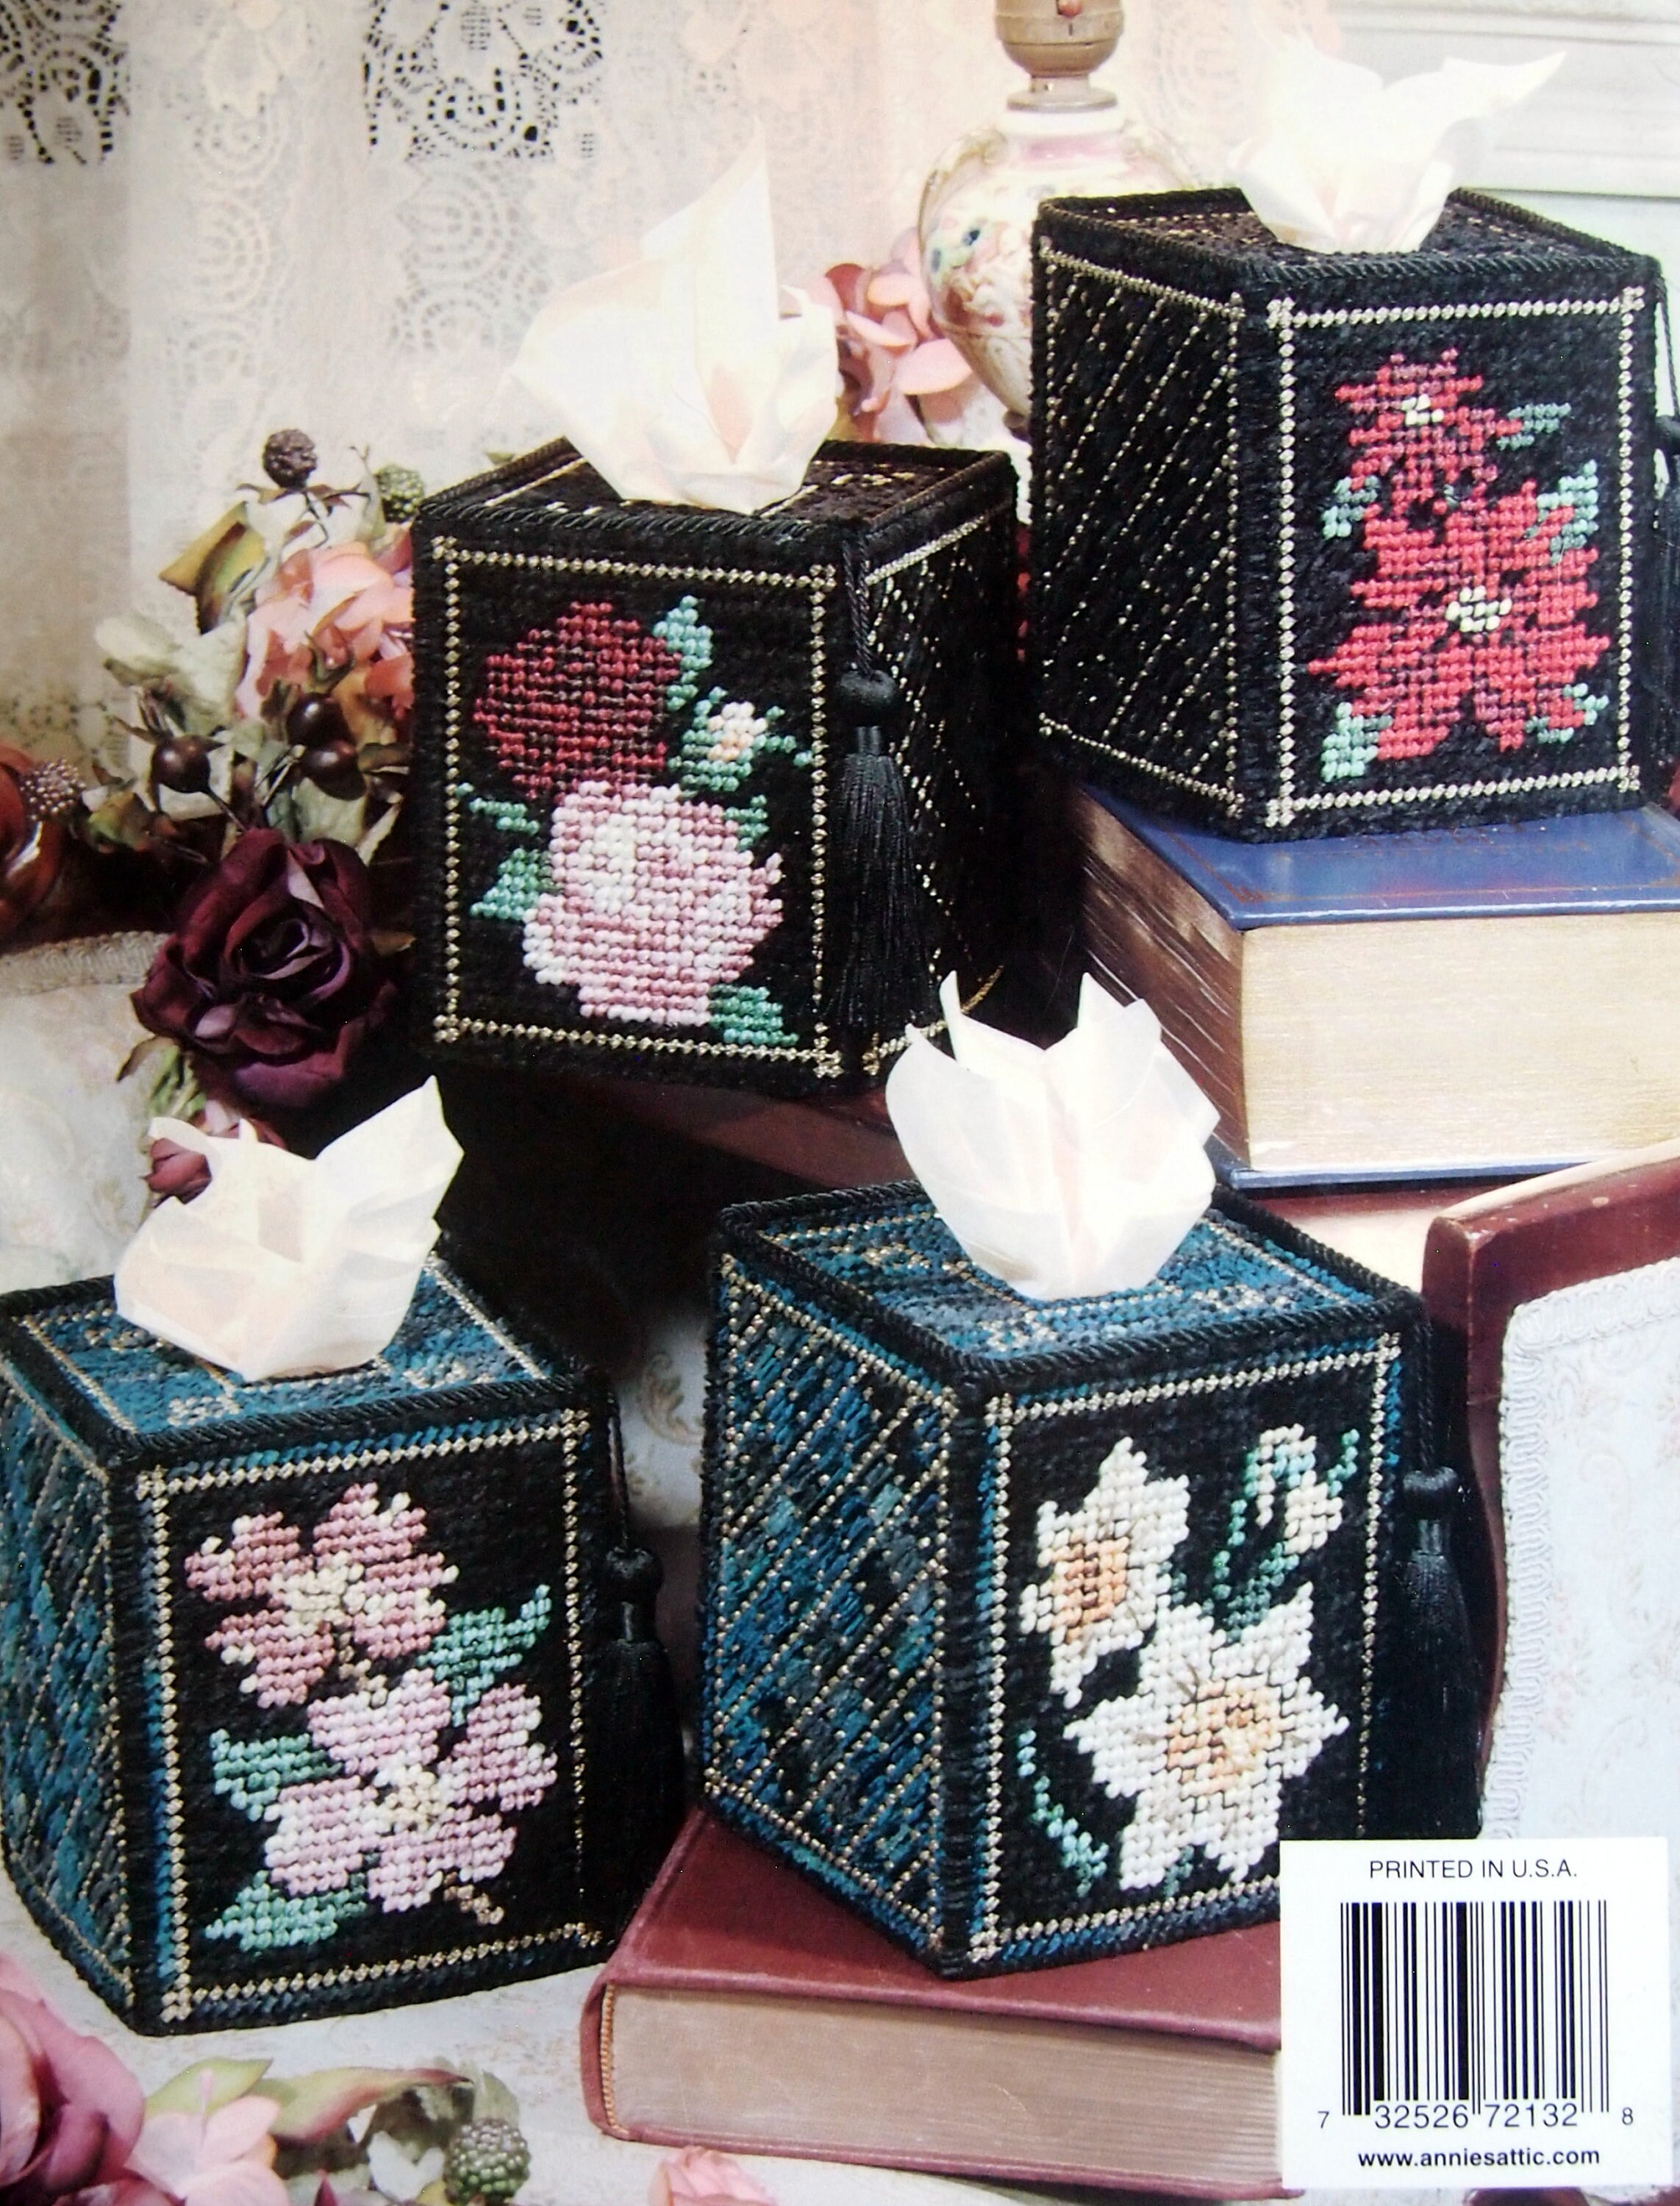 Chenille Floral Tissue Boxes by Janelle Giese and Annie's Attic